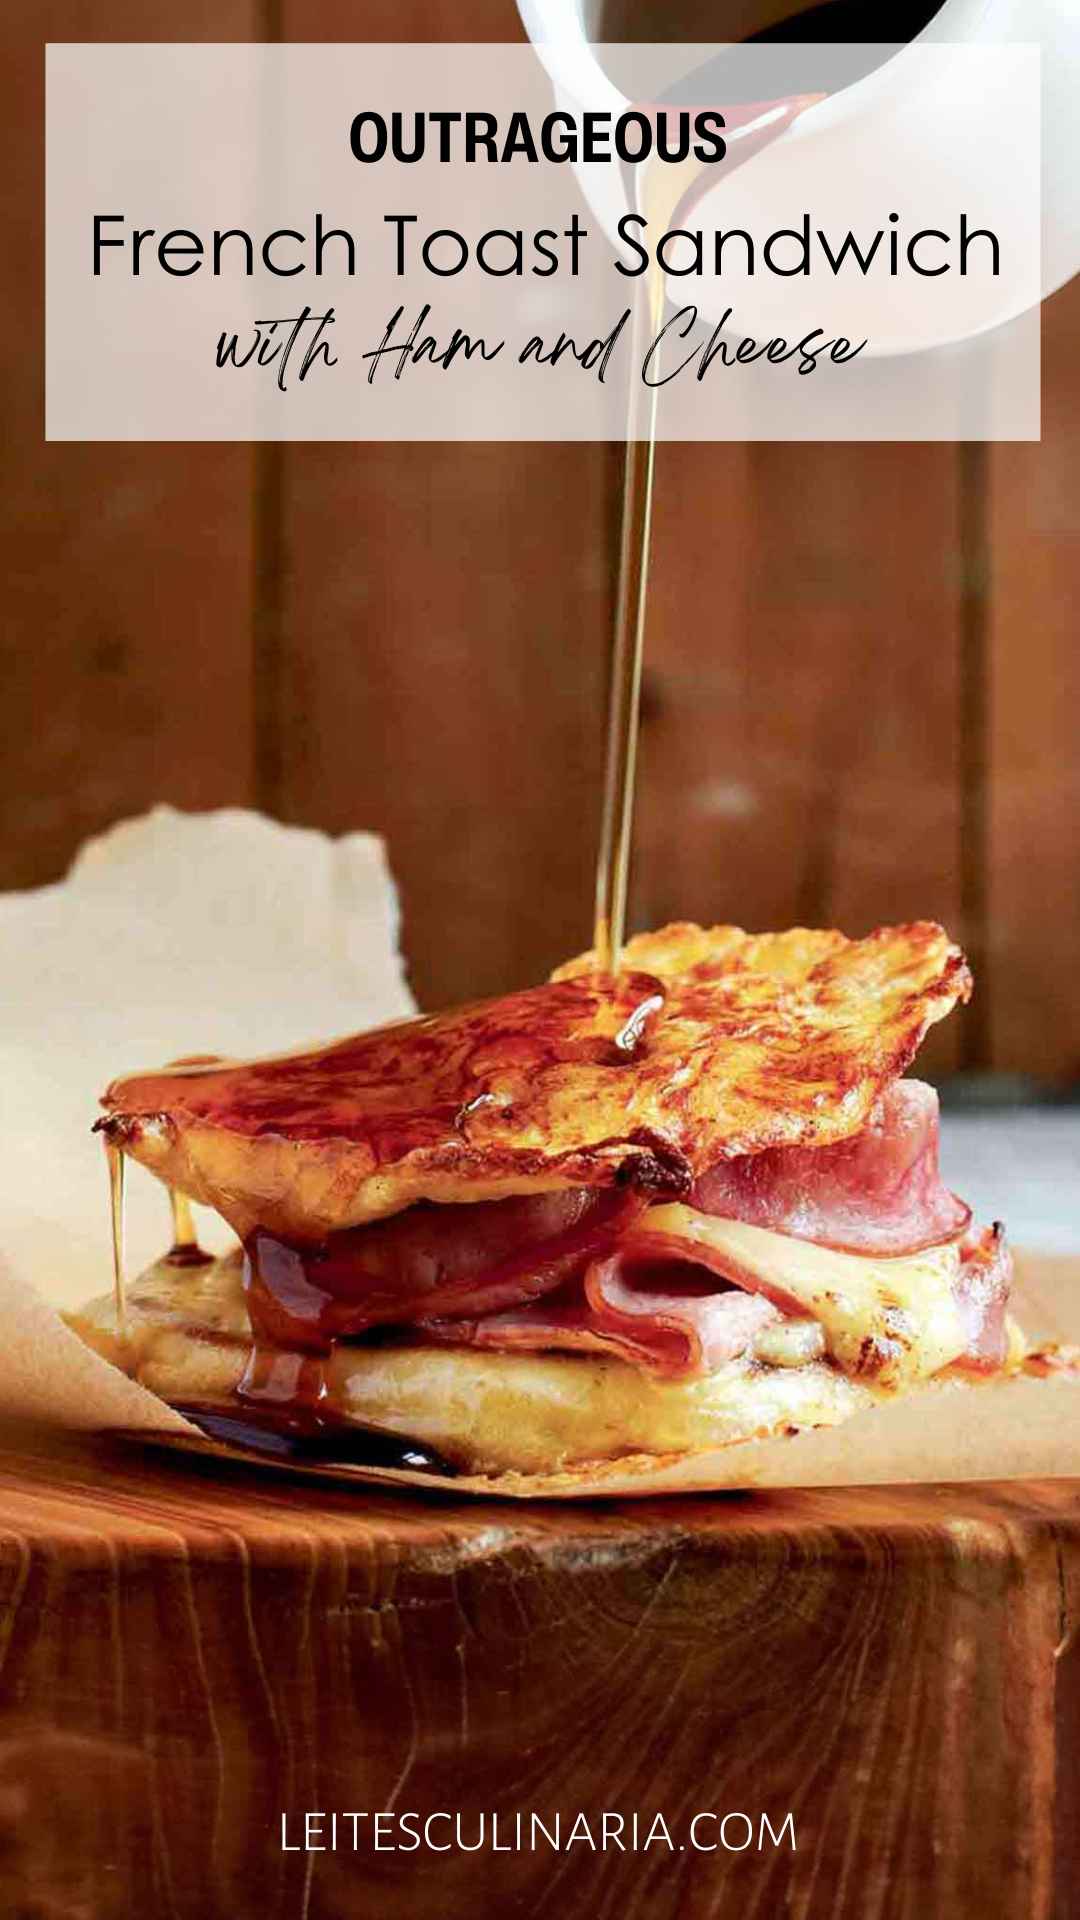 A Monte Cristo sandwich, made with French toast, ham, and Gruyère, with syrup being poured over it.